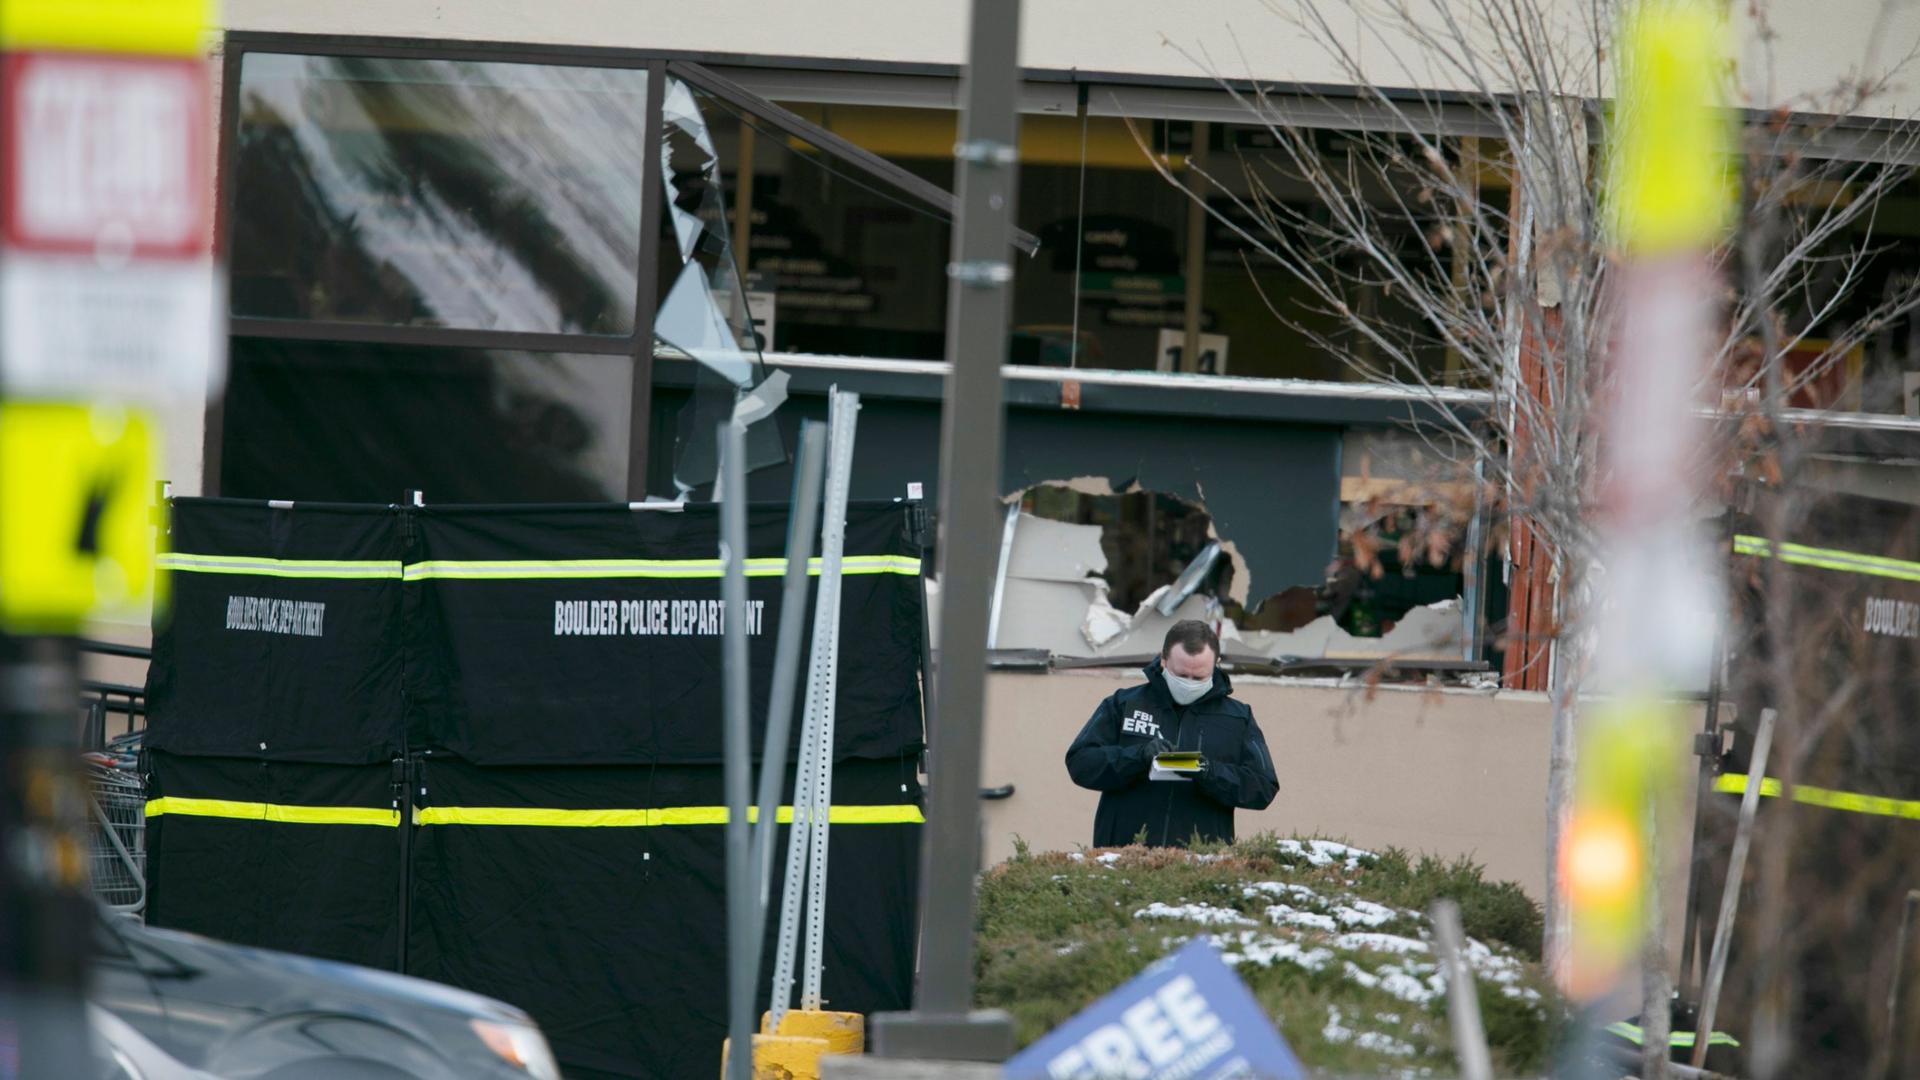 A police officer is shown wearing a face mask amidst broken glass and other remnants of a shooting with Boulder Police baracades in the nearground.